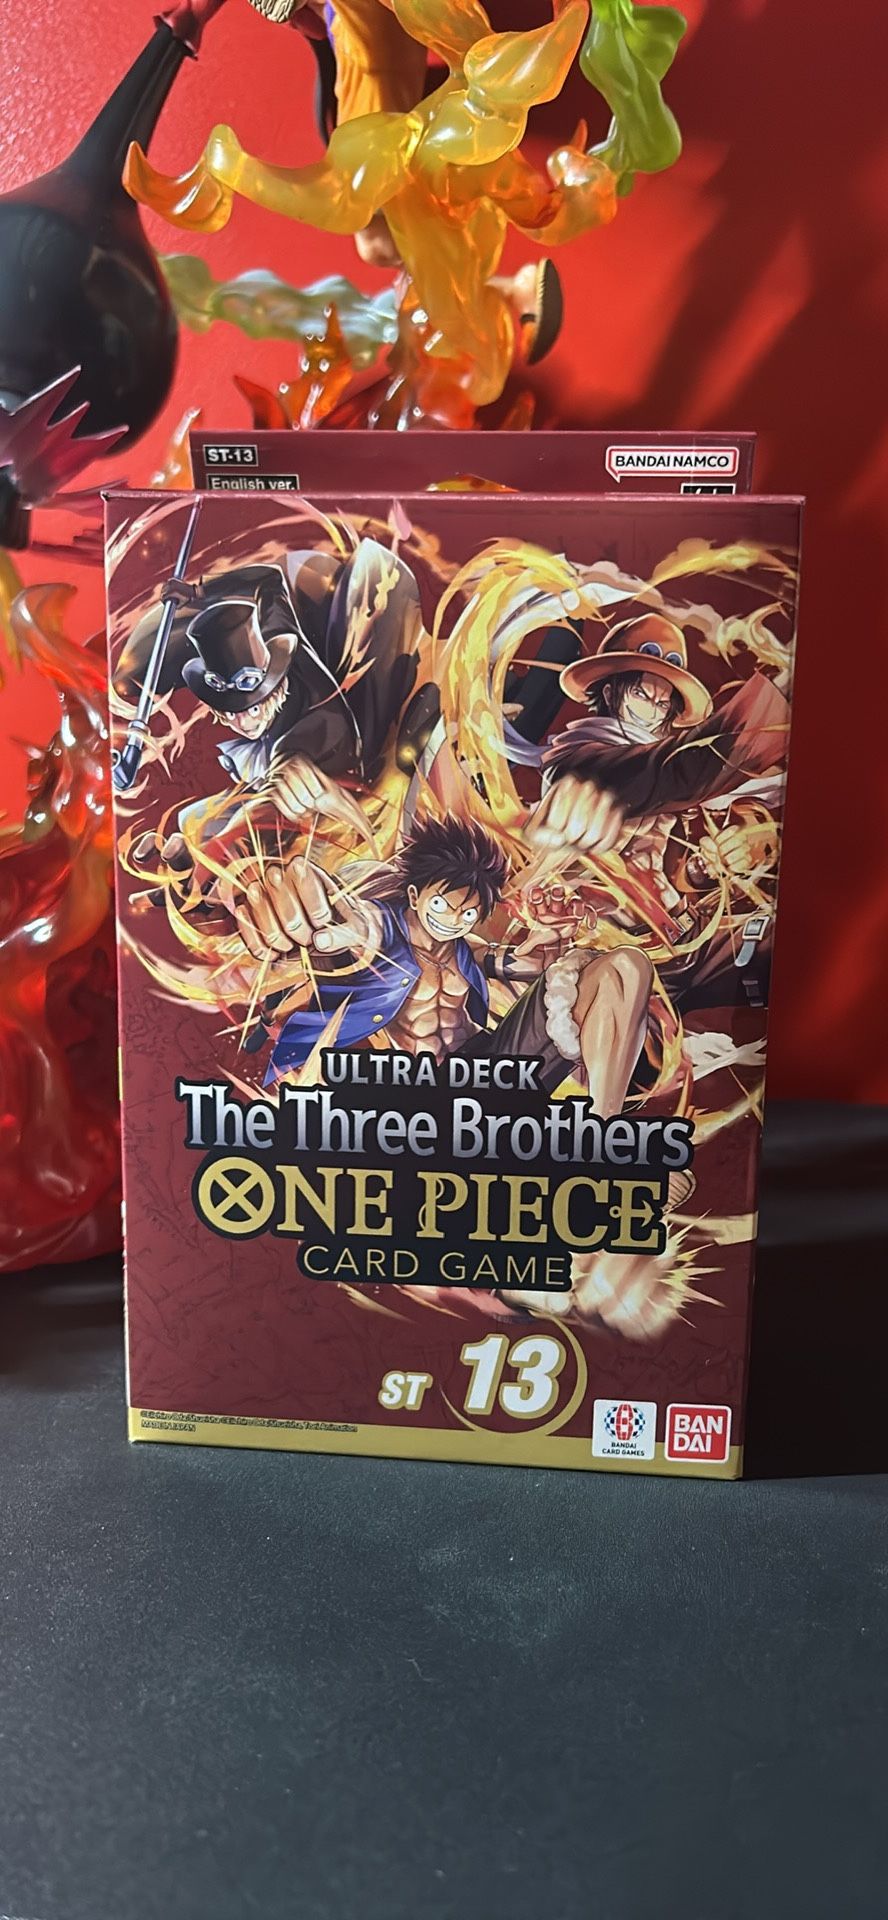 One Piece Card Game ST-13